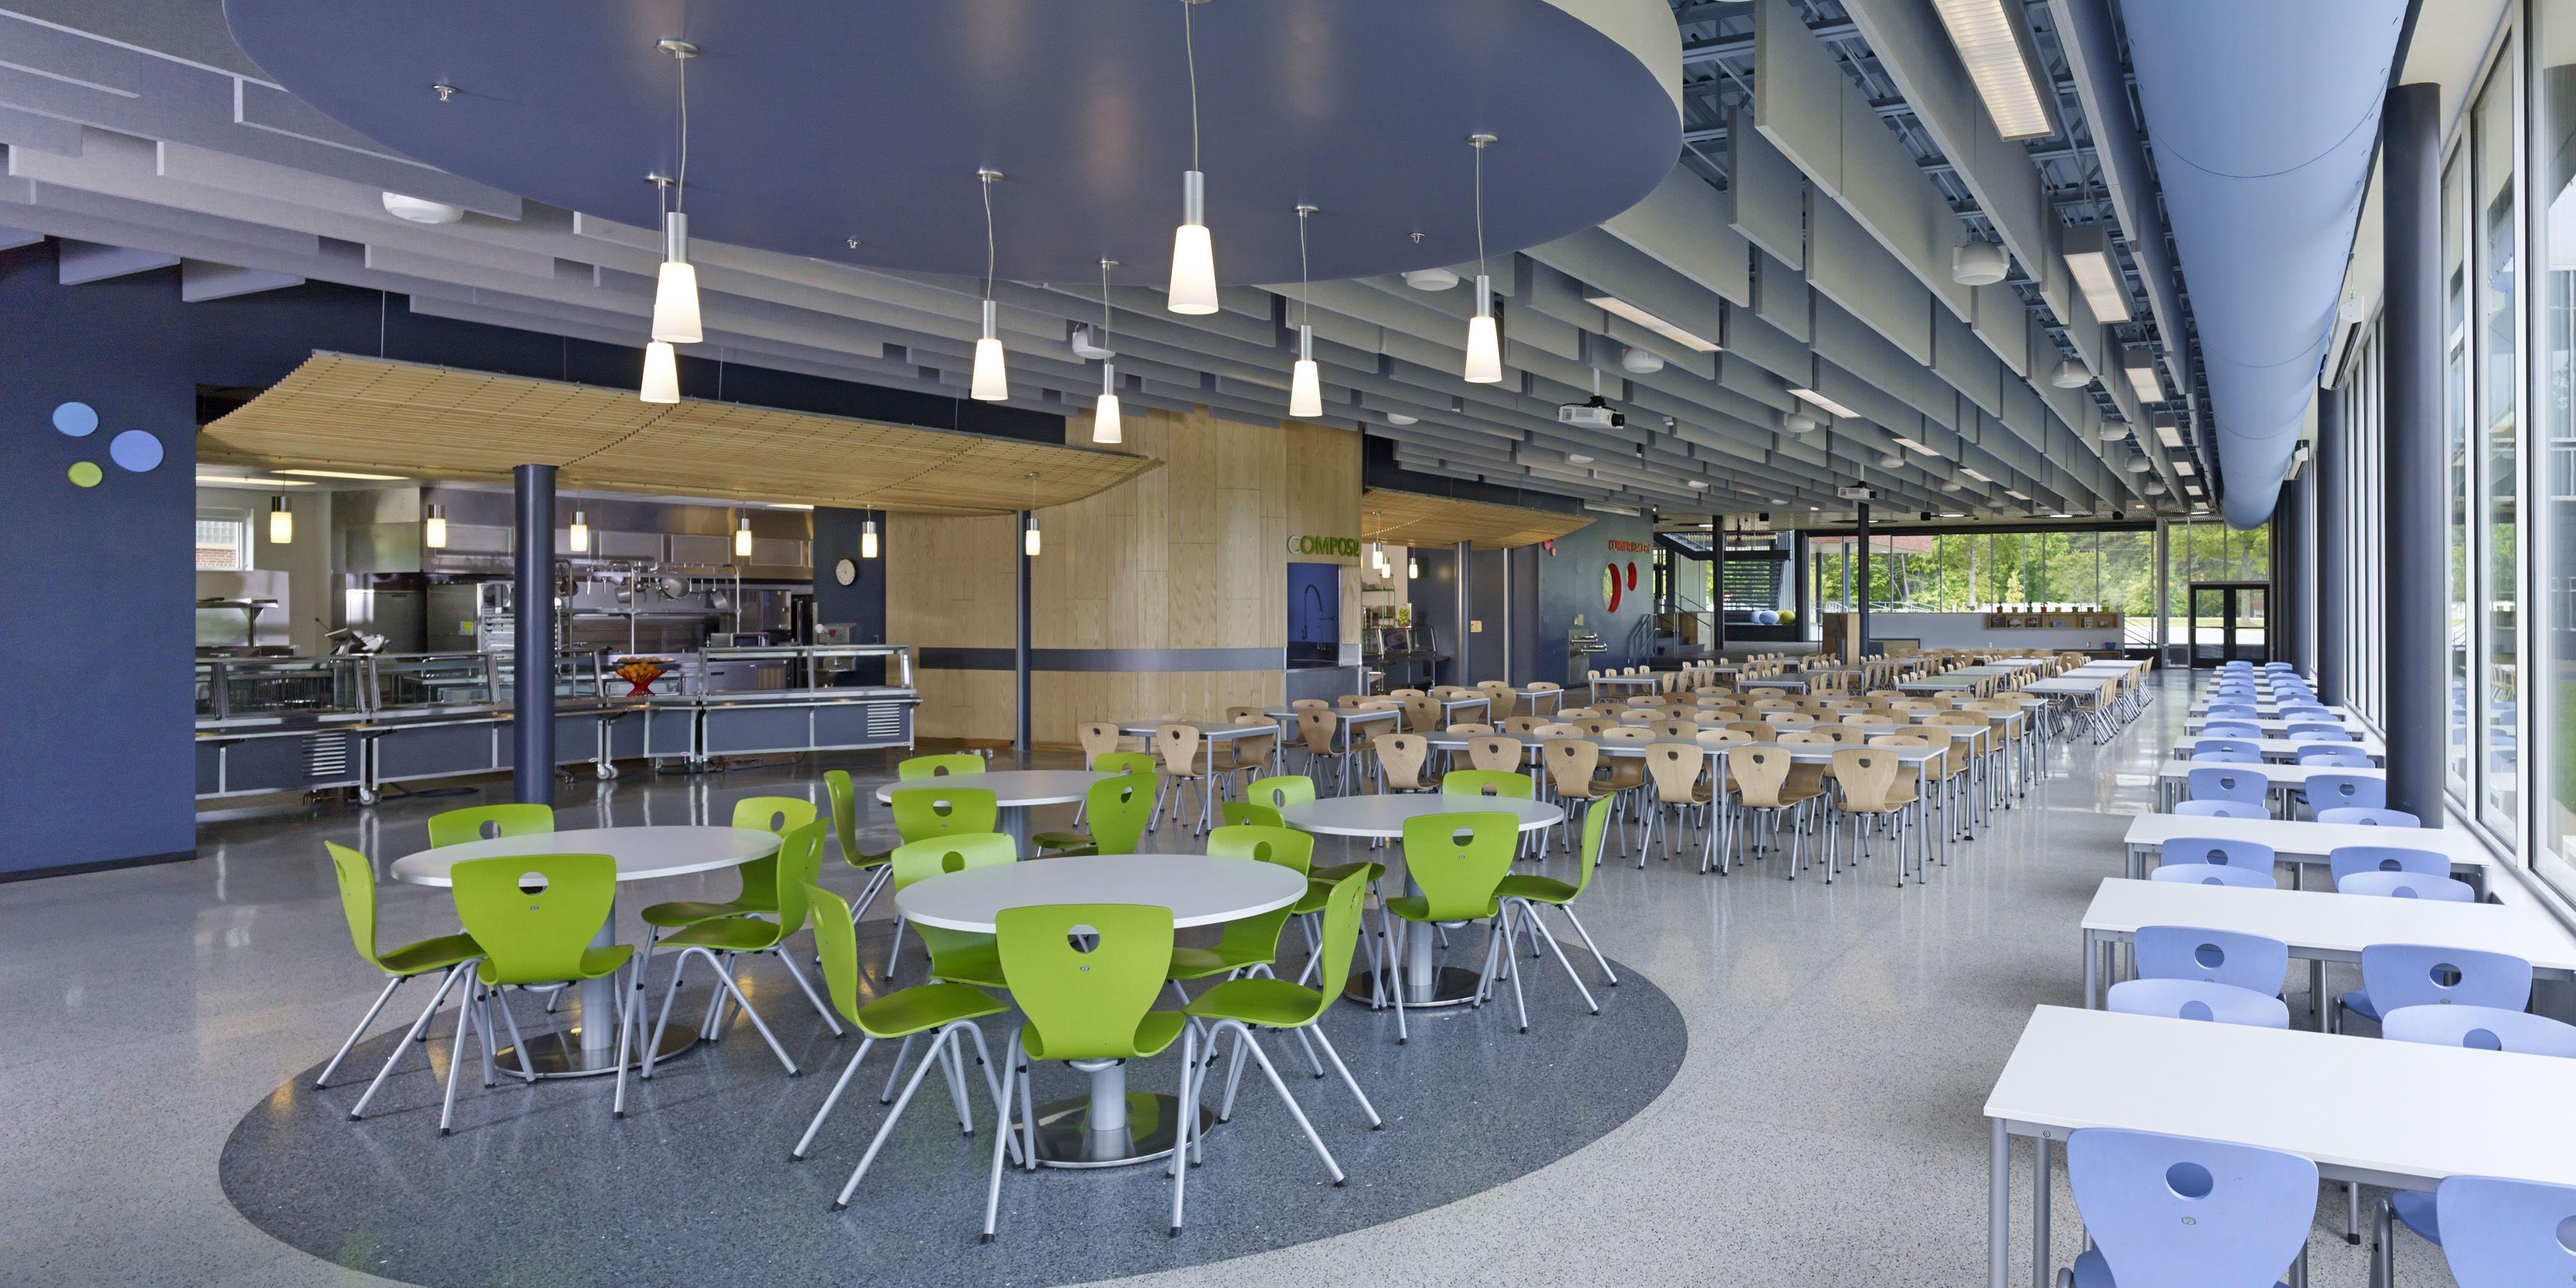 VMDO Architects: Thoughtful Design For K 12 And Higher Education